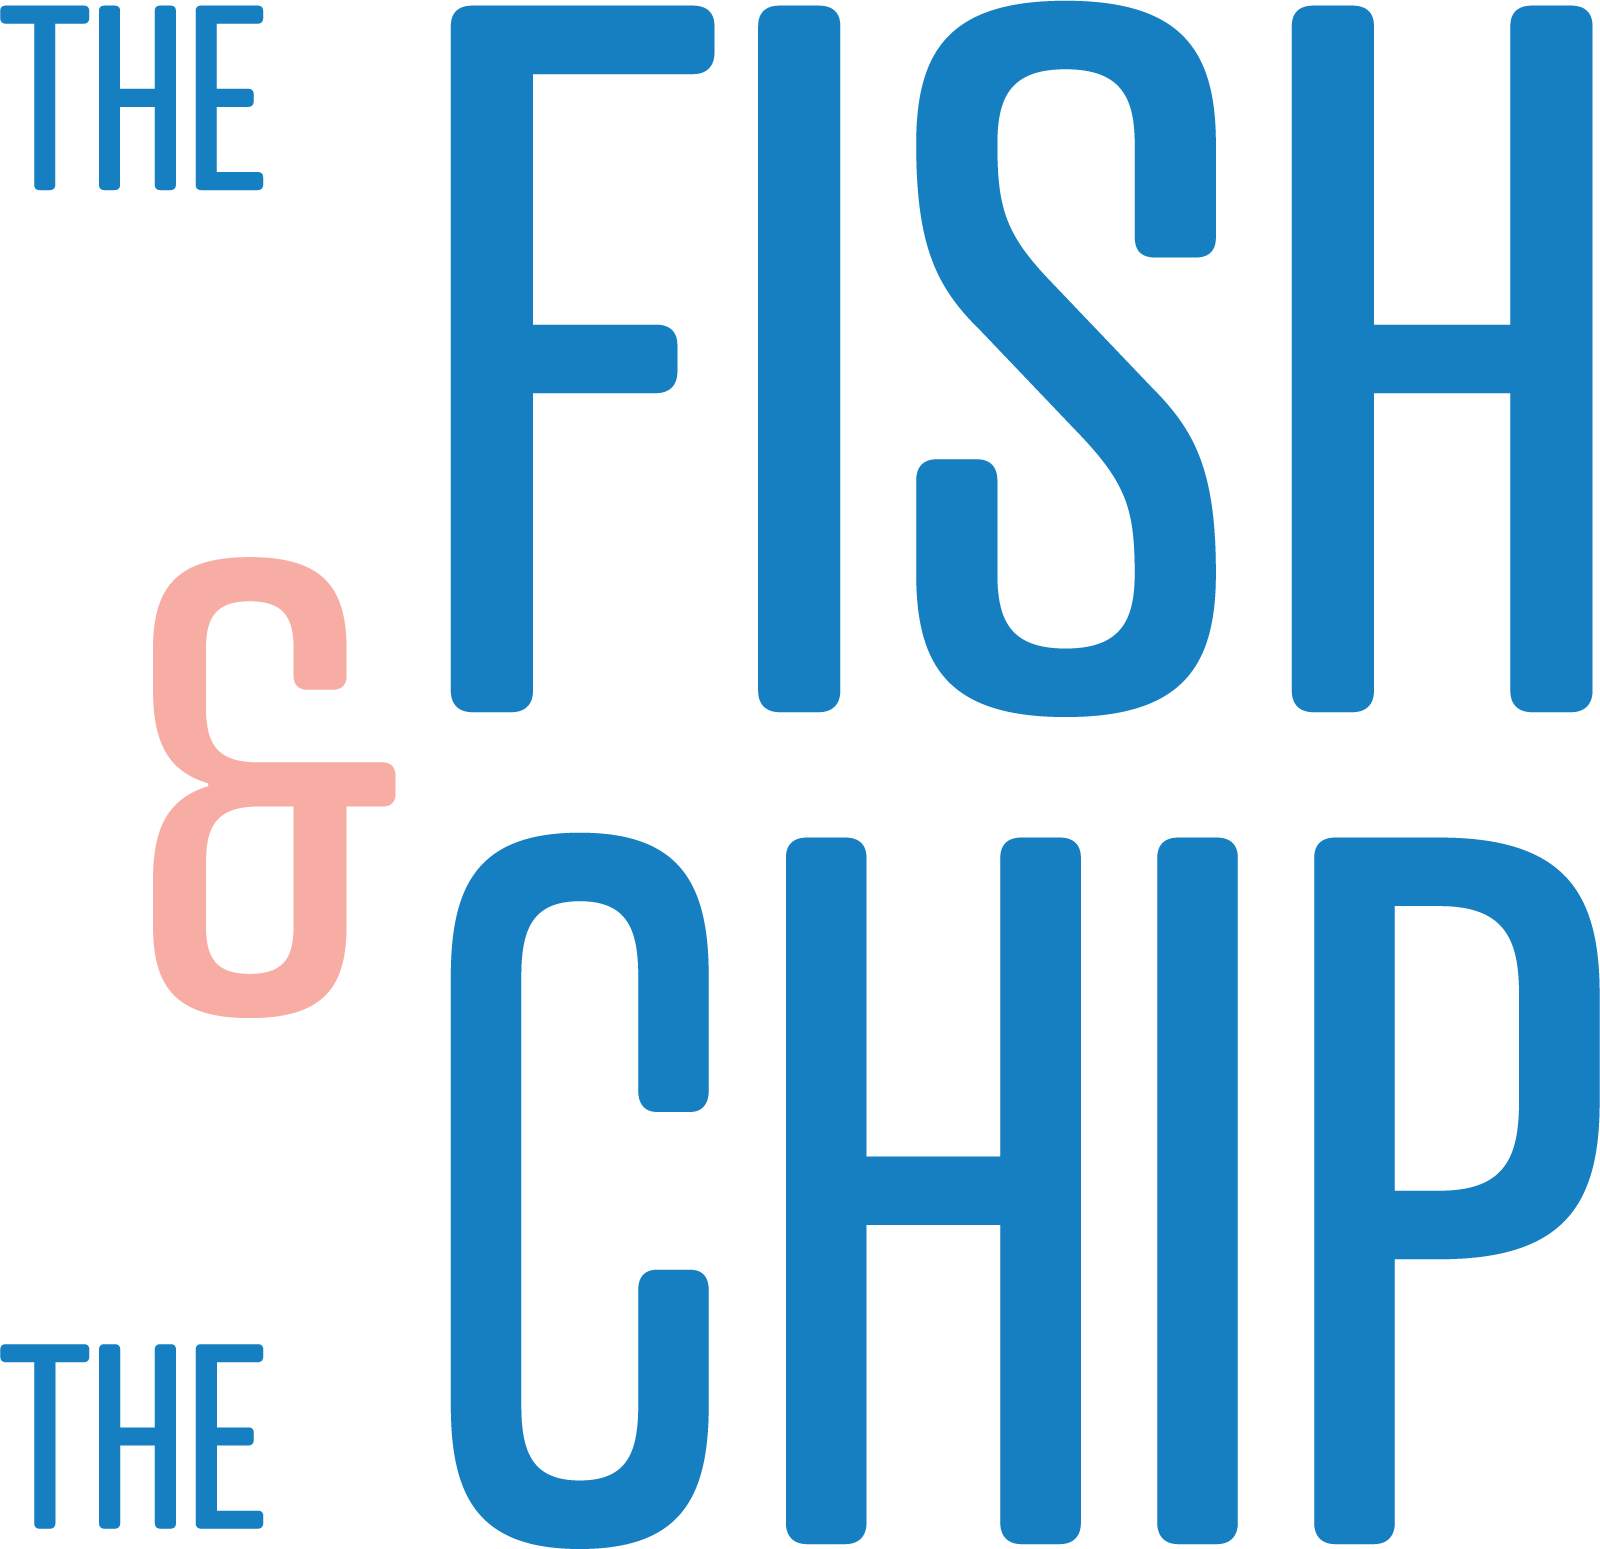 Chip Logo - The Fish And The Chip Restaurant Leicester